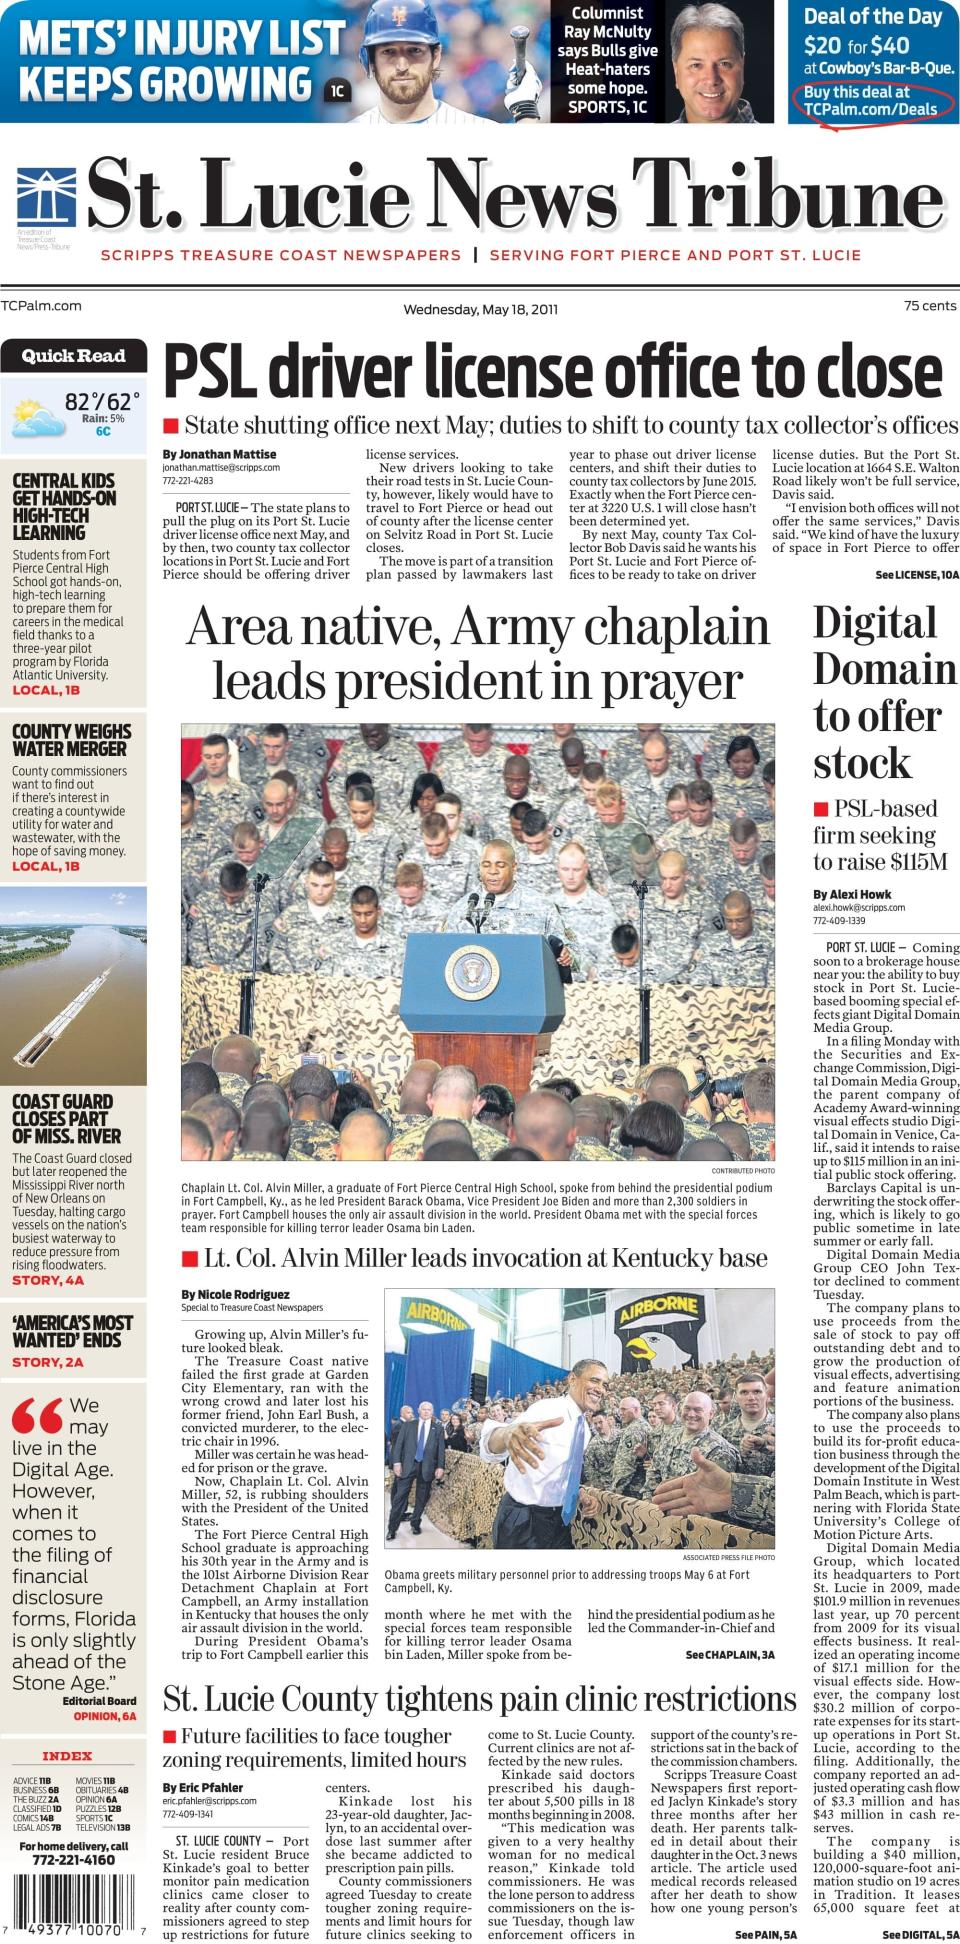 The St. Lucie News Tribune wrote about the Rev. Alvin Miller's invocation at Fort Campbell before speeches by President Barack Obama and Joe Biden in 2011.